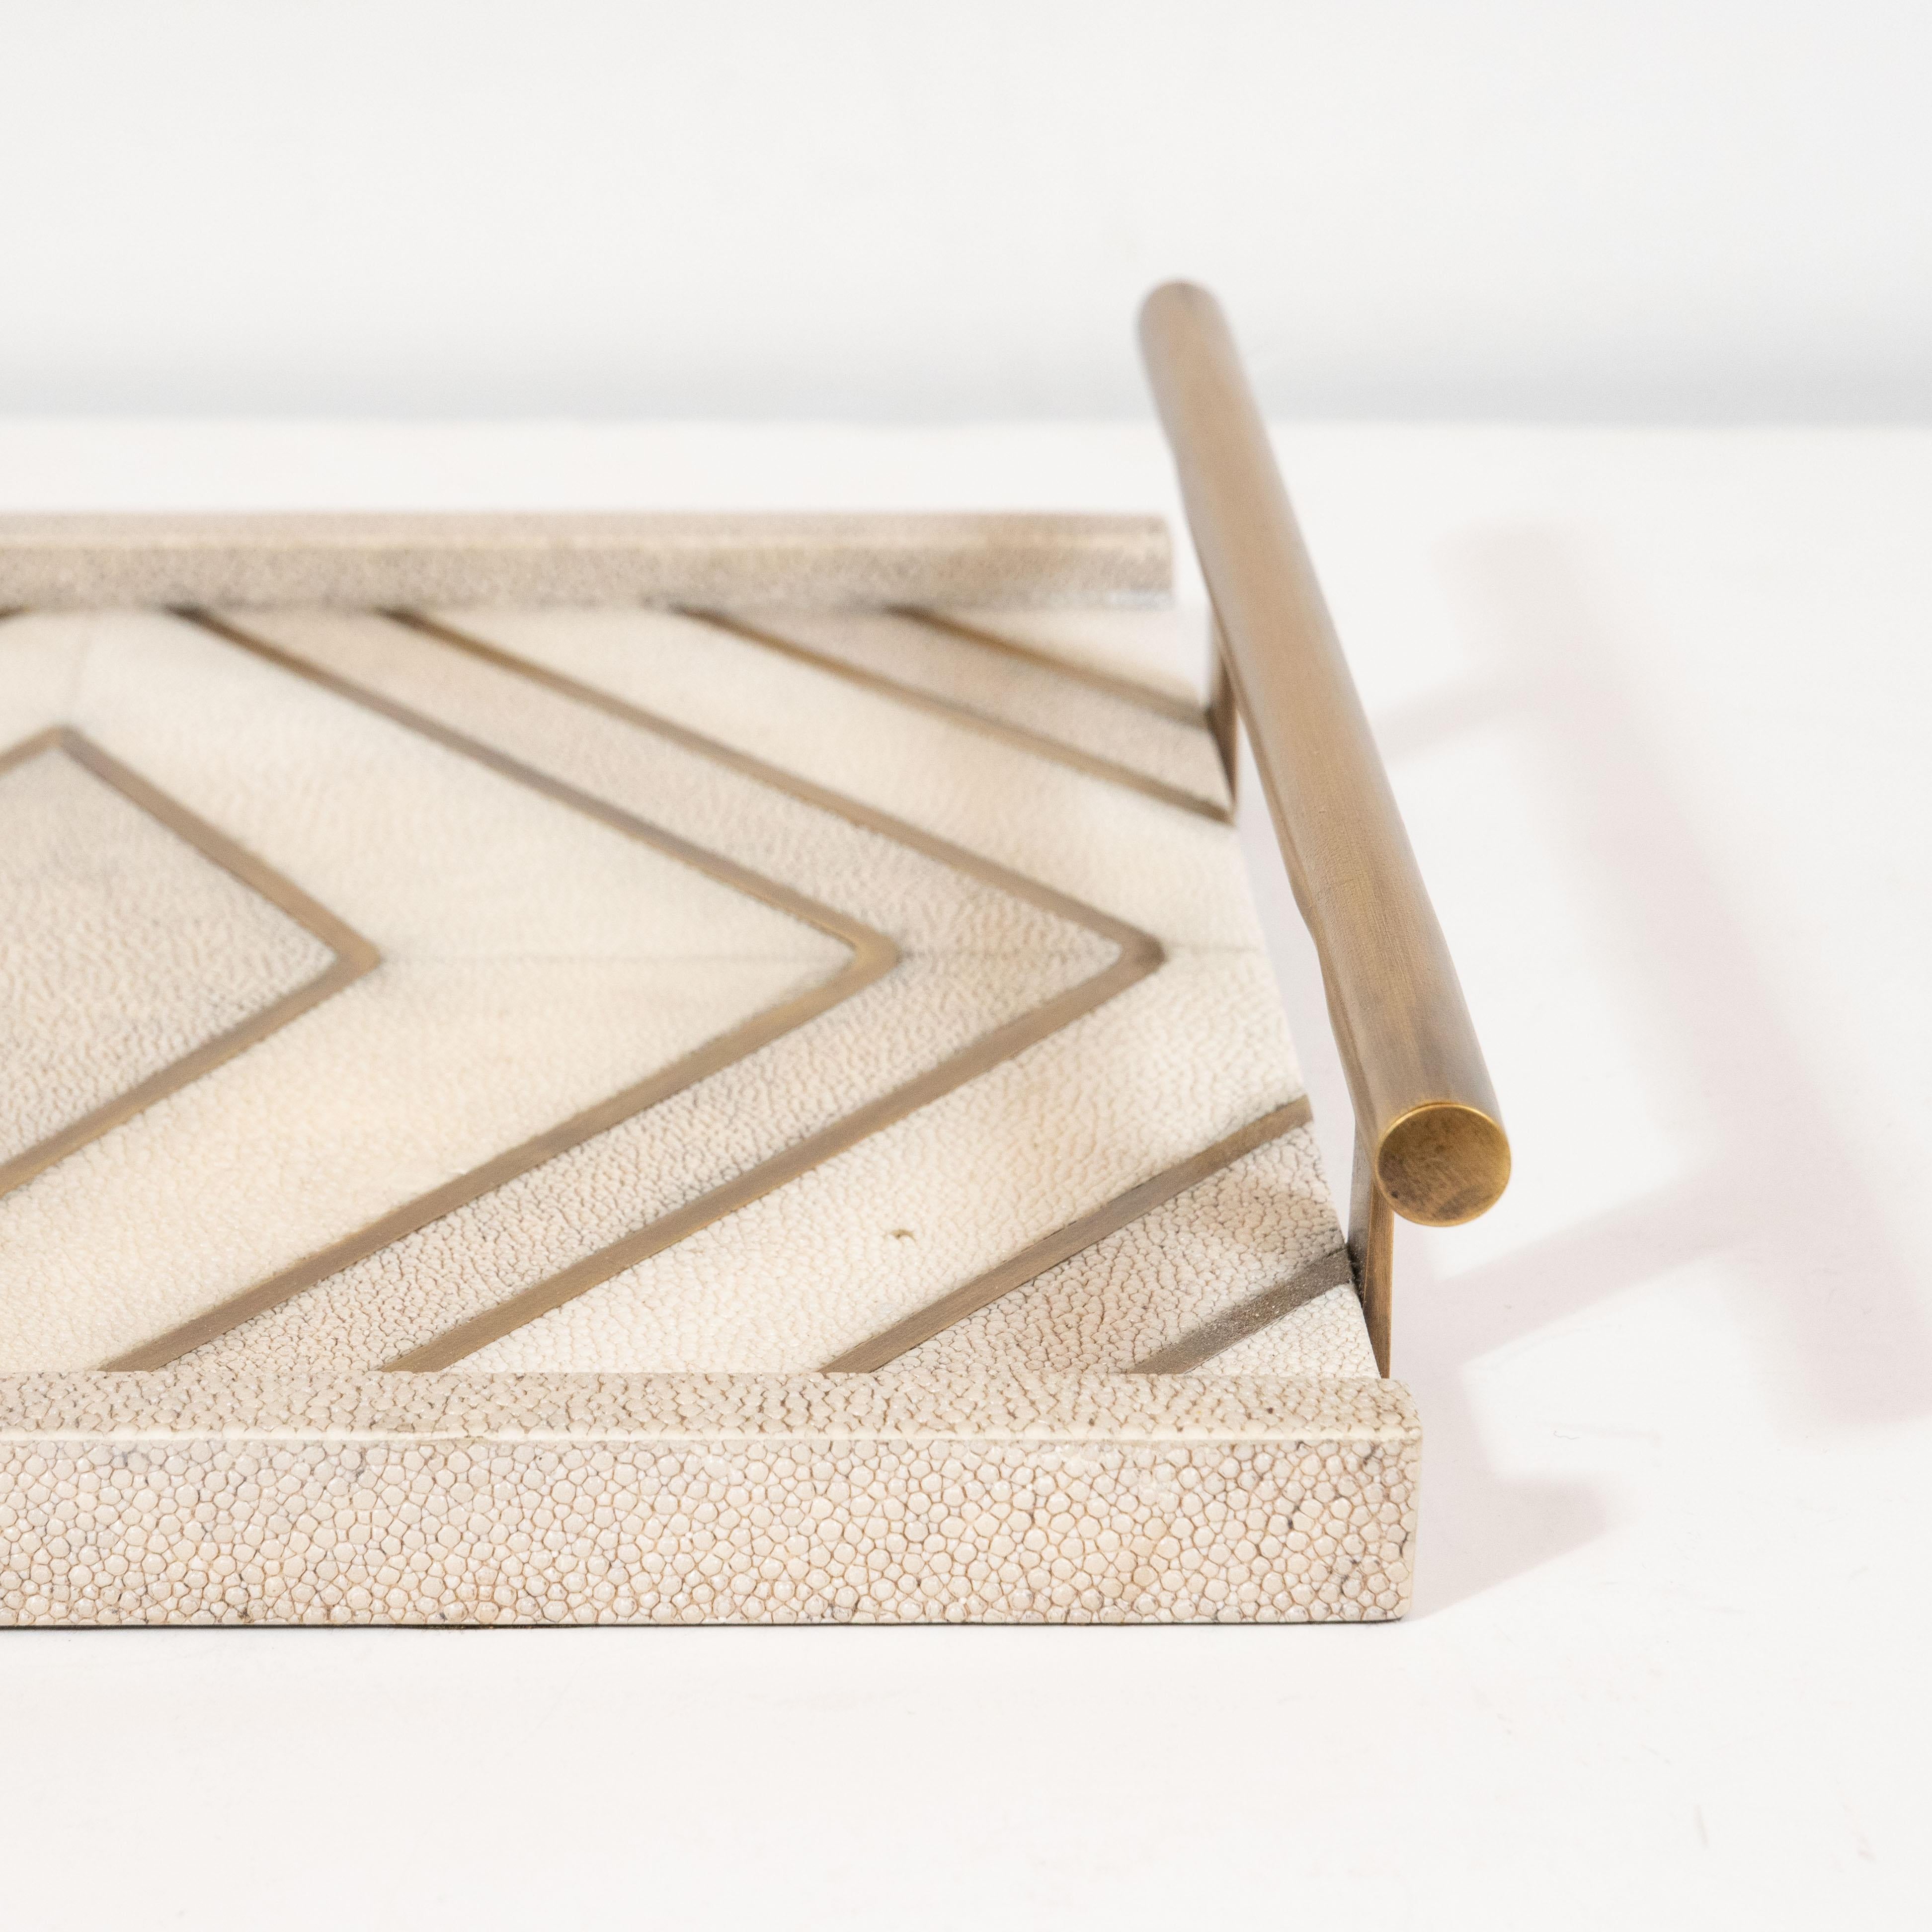 Philippine Modernist Concentric Diamond Form Shagreen and Brass Inlay Tray by Kifu, Paris